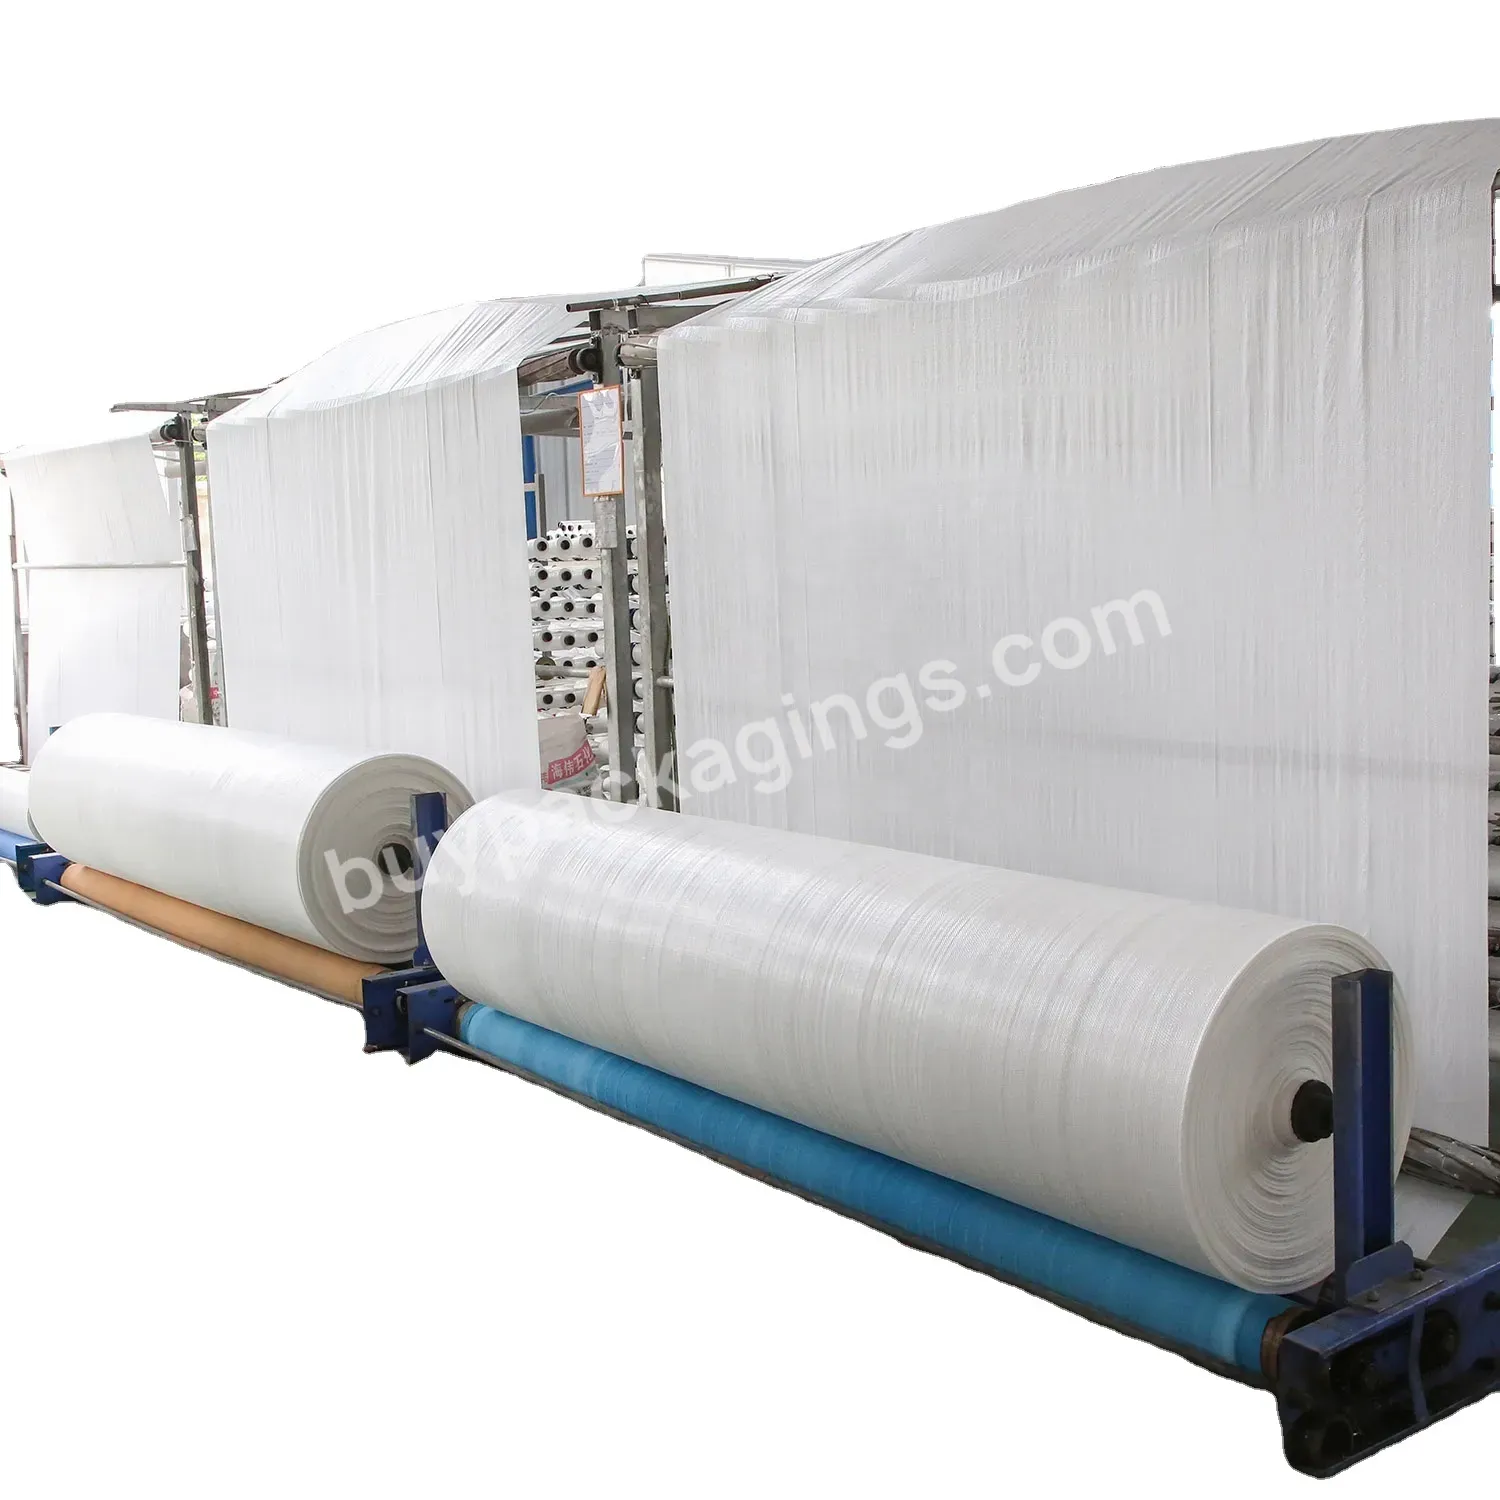 China Popular White Pp Woven Tubular Fabric Rolls For Making Feed Rice Fertilizer Bags - Buy Pp Woven Tubular Fabric Rolls,Woven Tubular Fabric,Pp Woven Sack Roll.